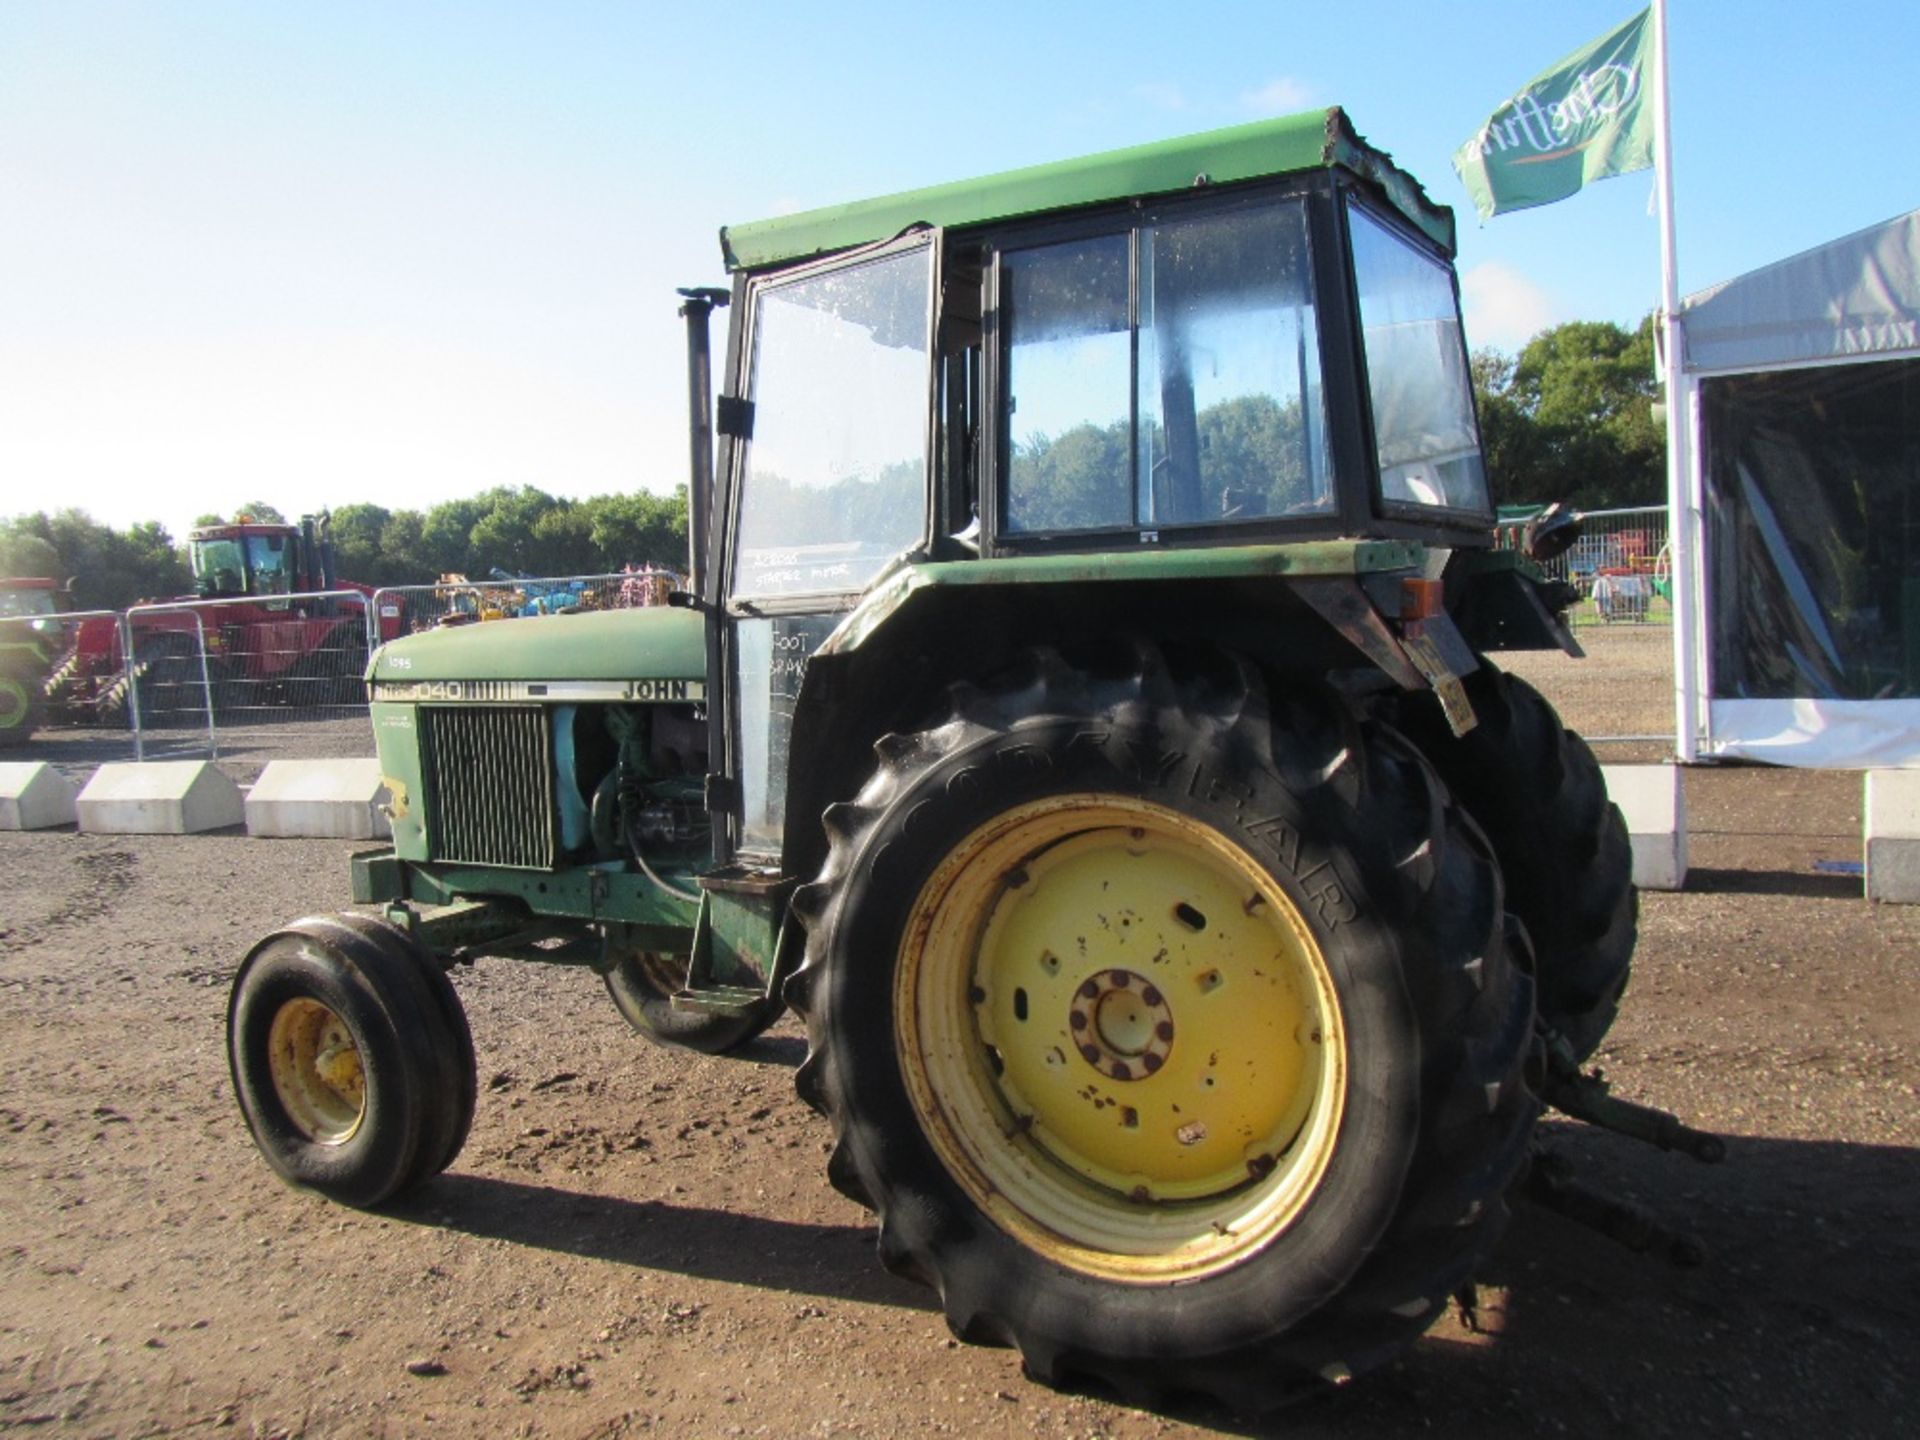 John Deere 3040 2wd Tractor with OPU Cab Reg. No. TFM 461V Ser No 364600 UNRESERVED LOT - Image 9 of 16